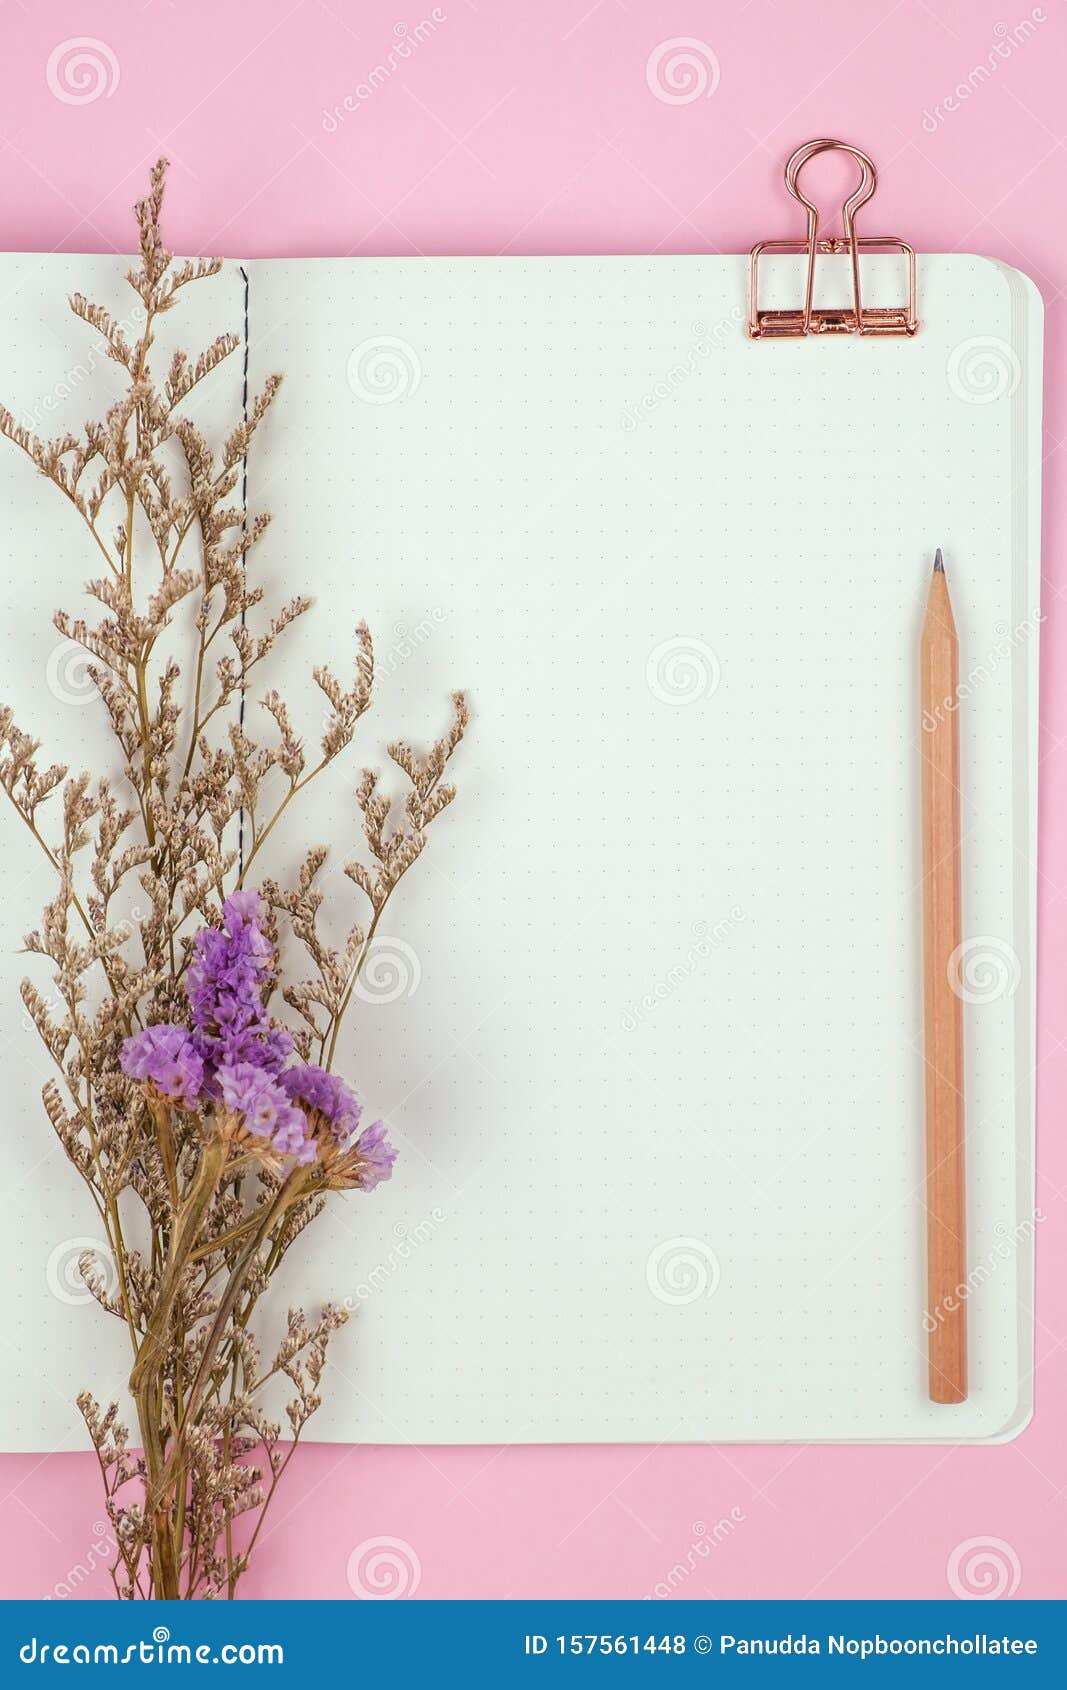 Top View of Blank Notebook with Stationery and Flower on Pink Background  Stock Photo - Image of caspia, decorate: 157561448